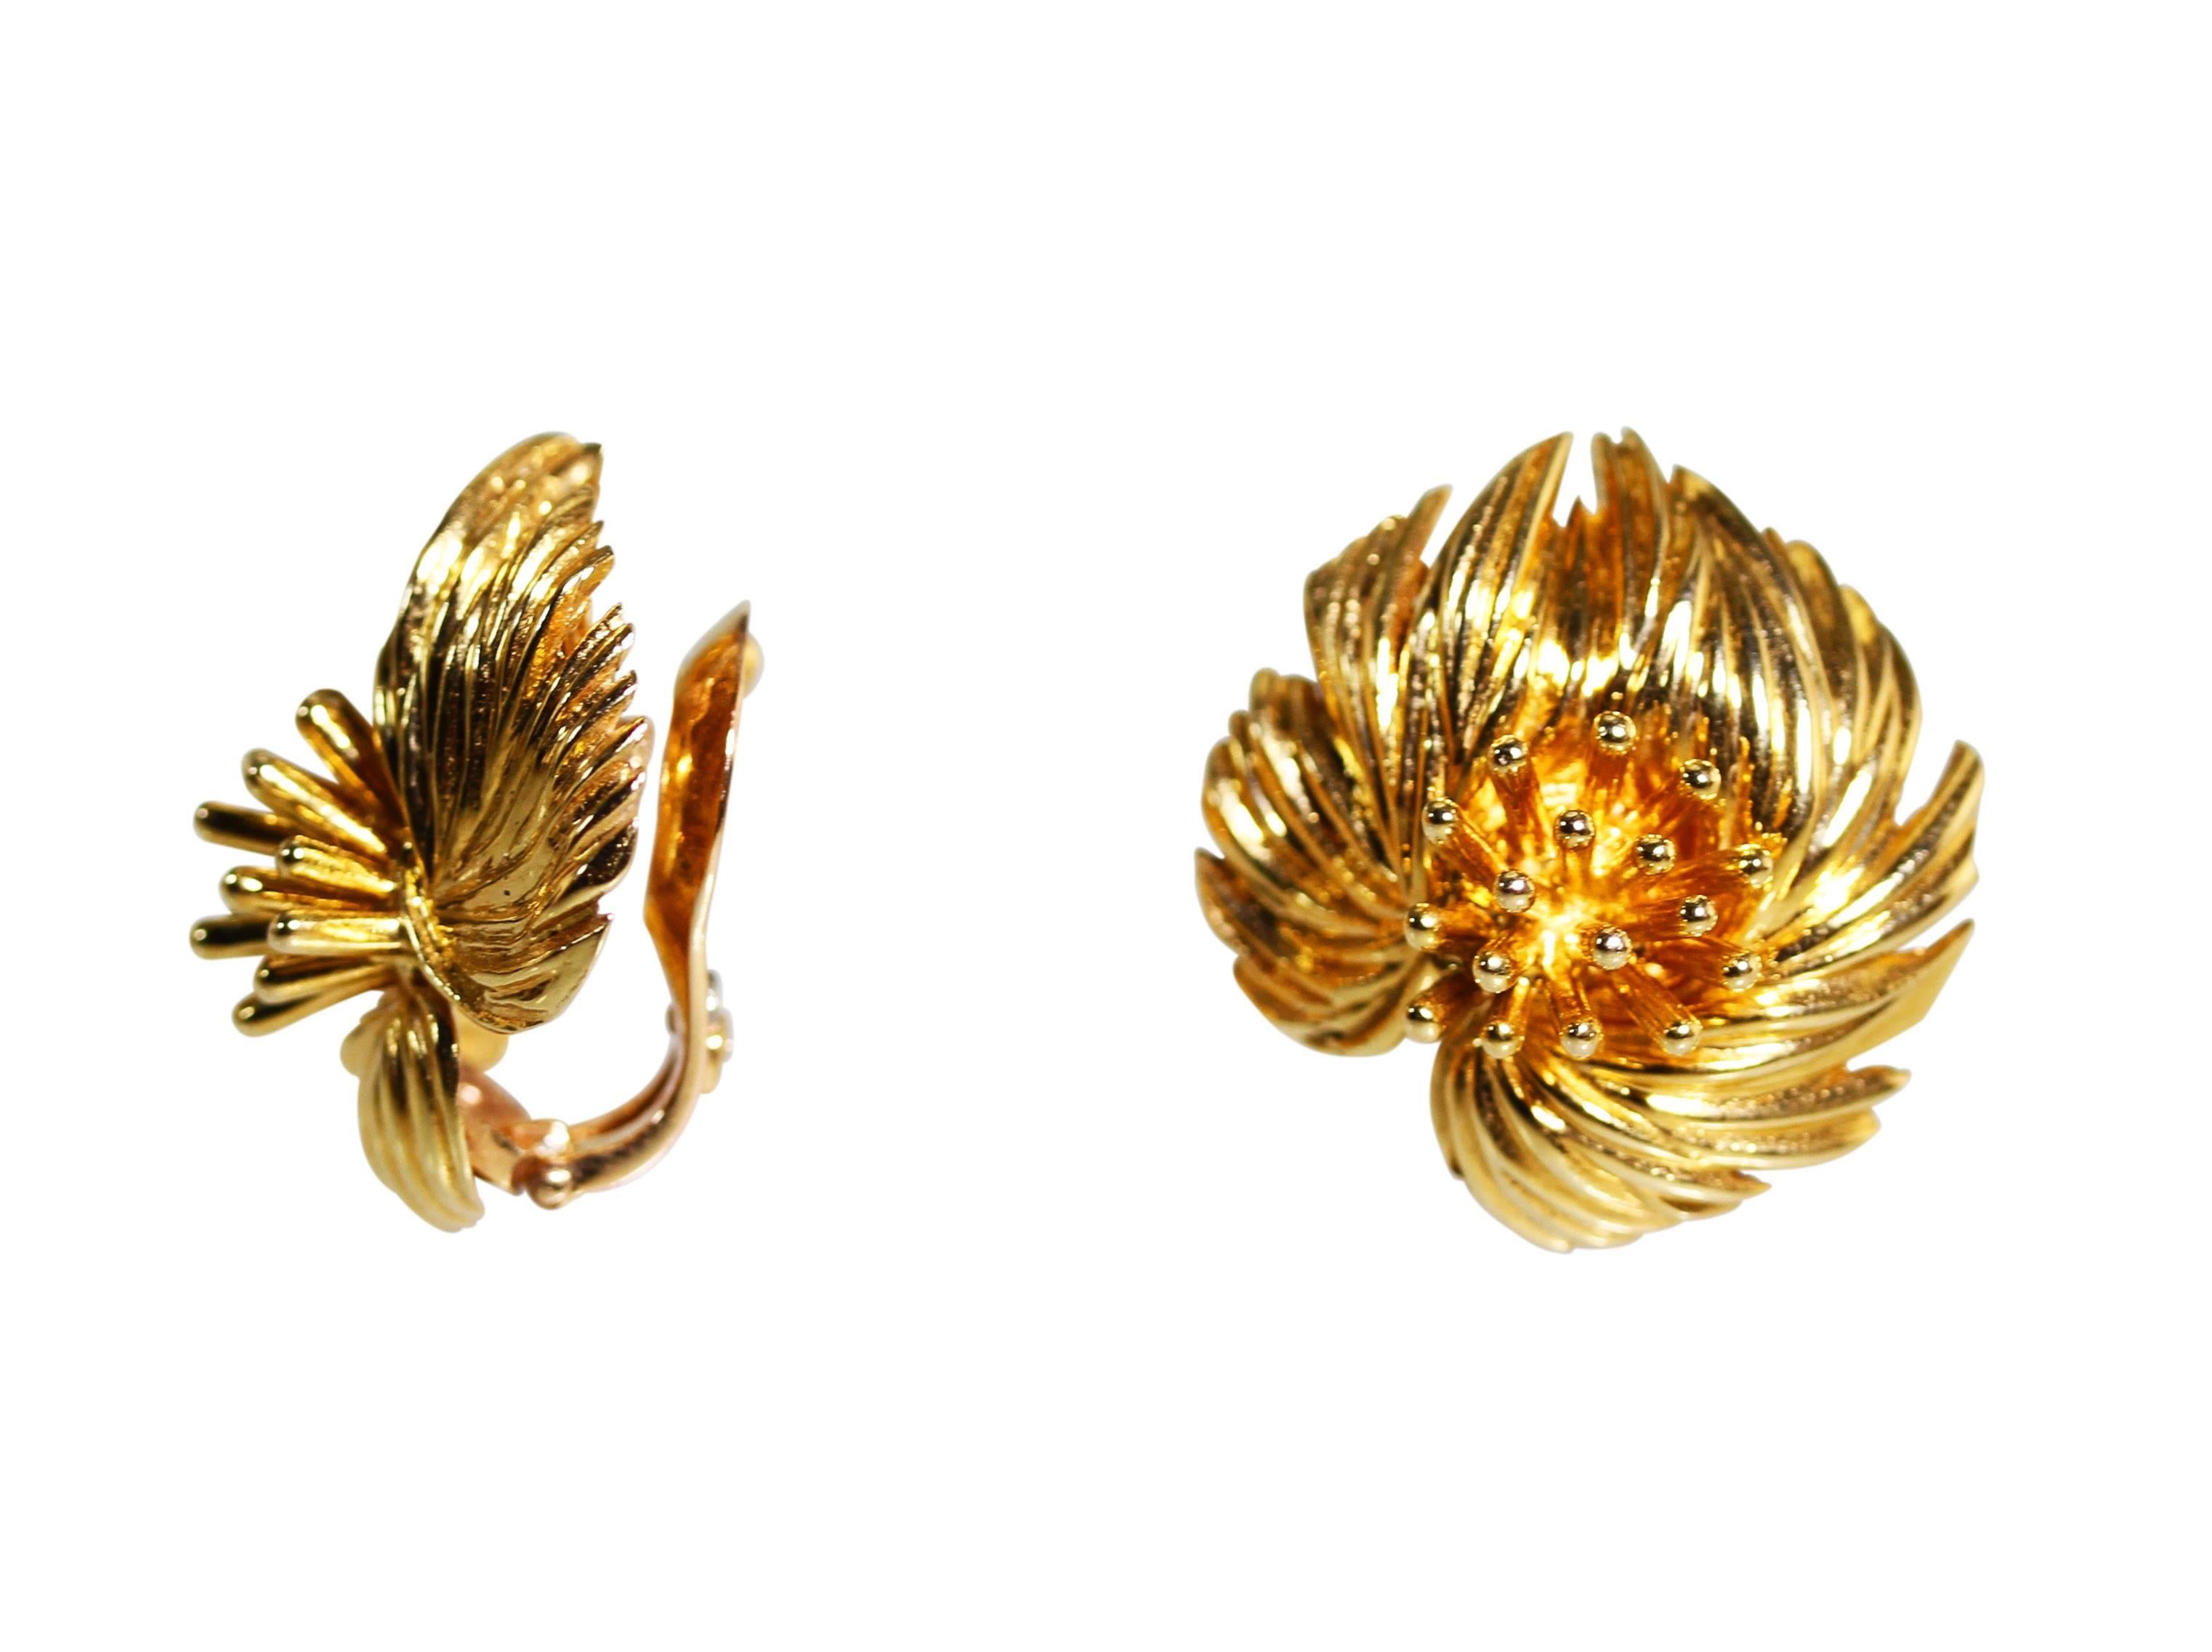 Pair of 18 Karat Gold Earclips by Van Cleef & Arpels, Paris, 1959
• Signed Van Cleef & Arpels, numbered 14283, stamped 750, with makers mark and French assay marks
• Measuring 7/8 by 7/8 inch, gross weight 19.3 grams